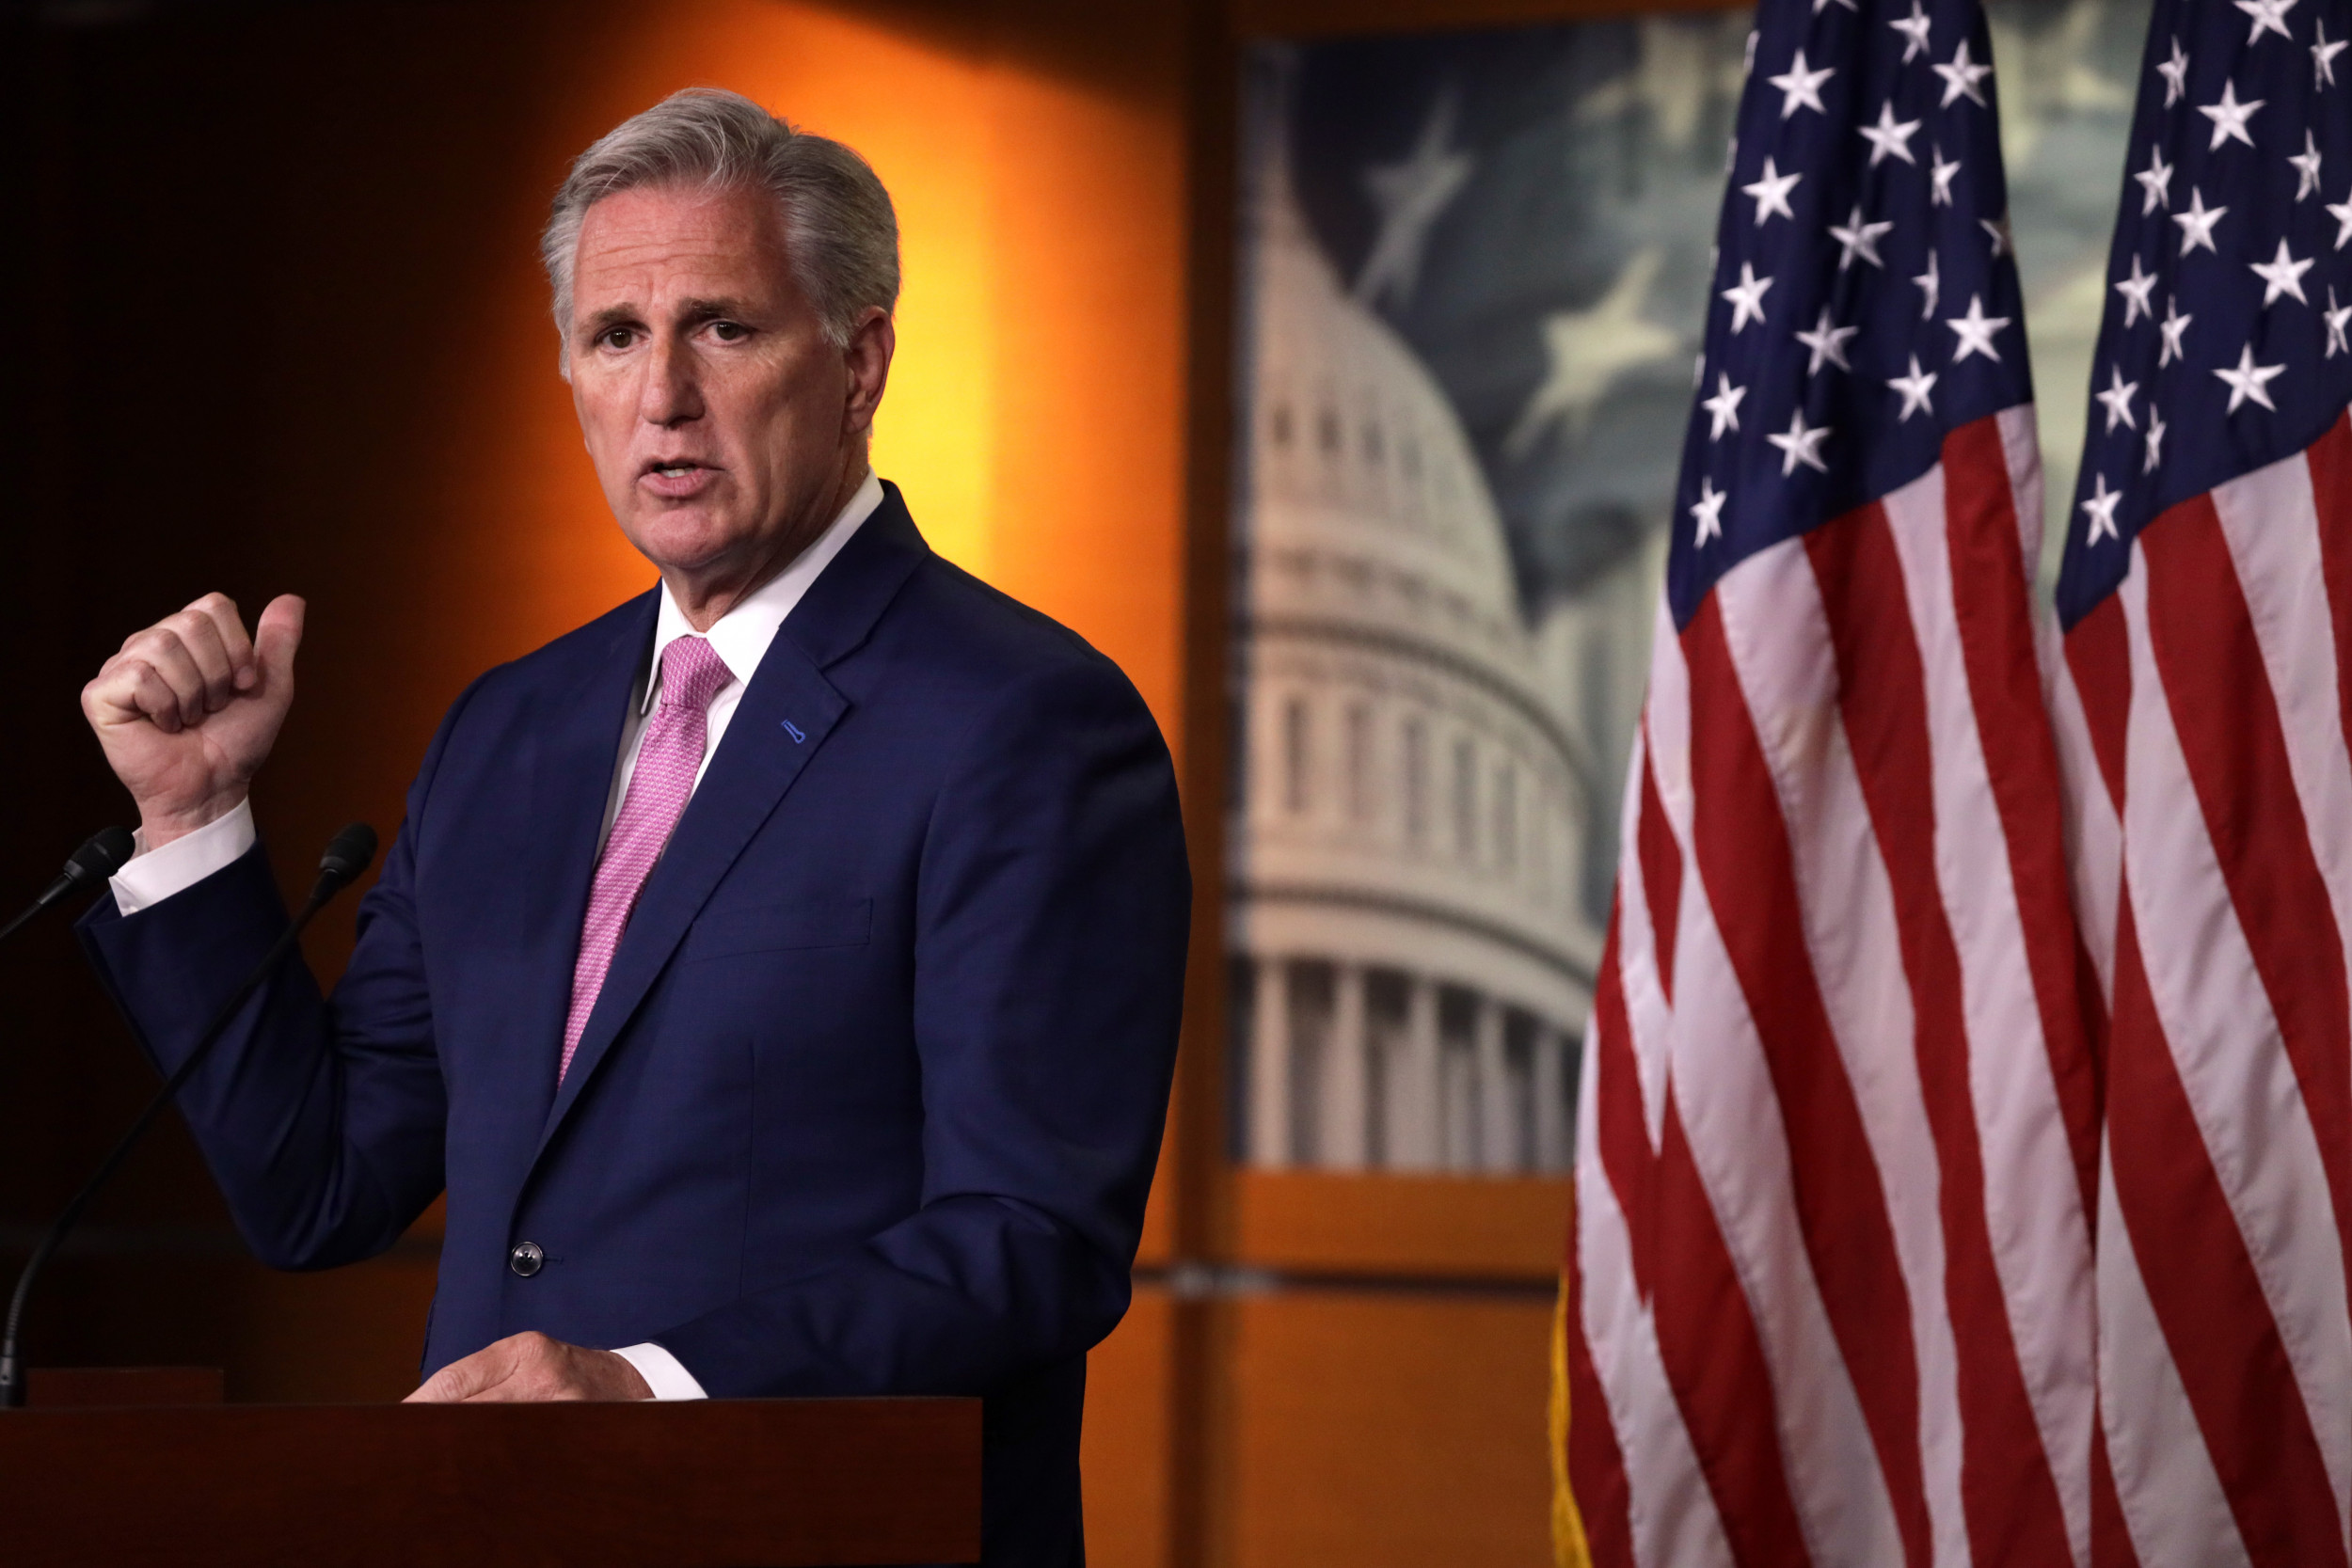 Kevin McCarthy strikes Democrats in the House for banning Dr. Seuss – they didn’t